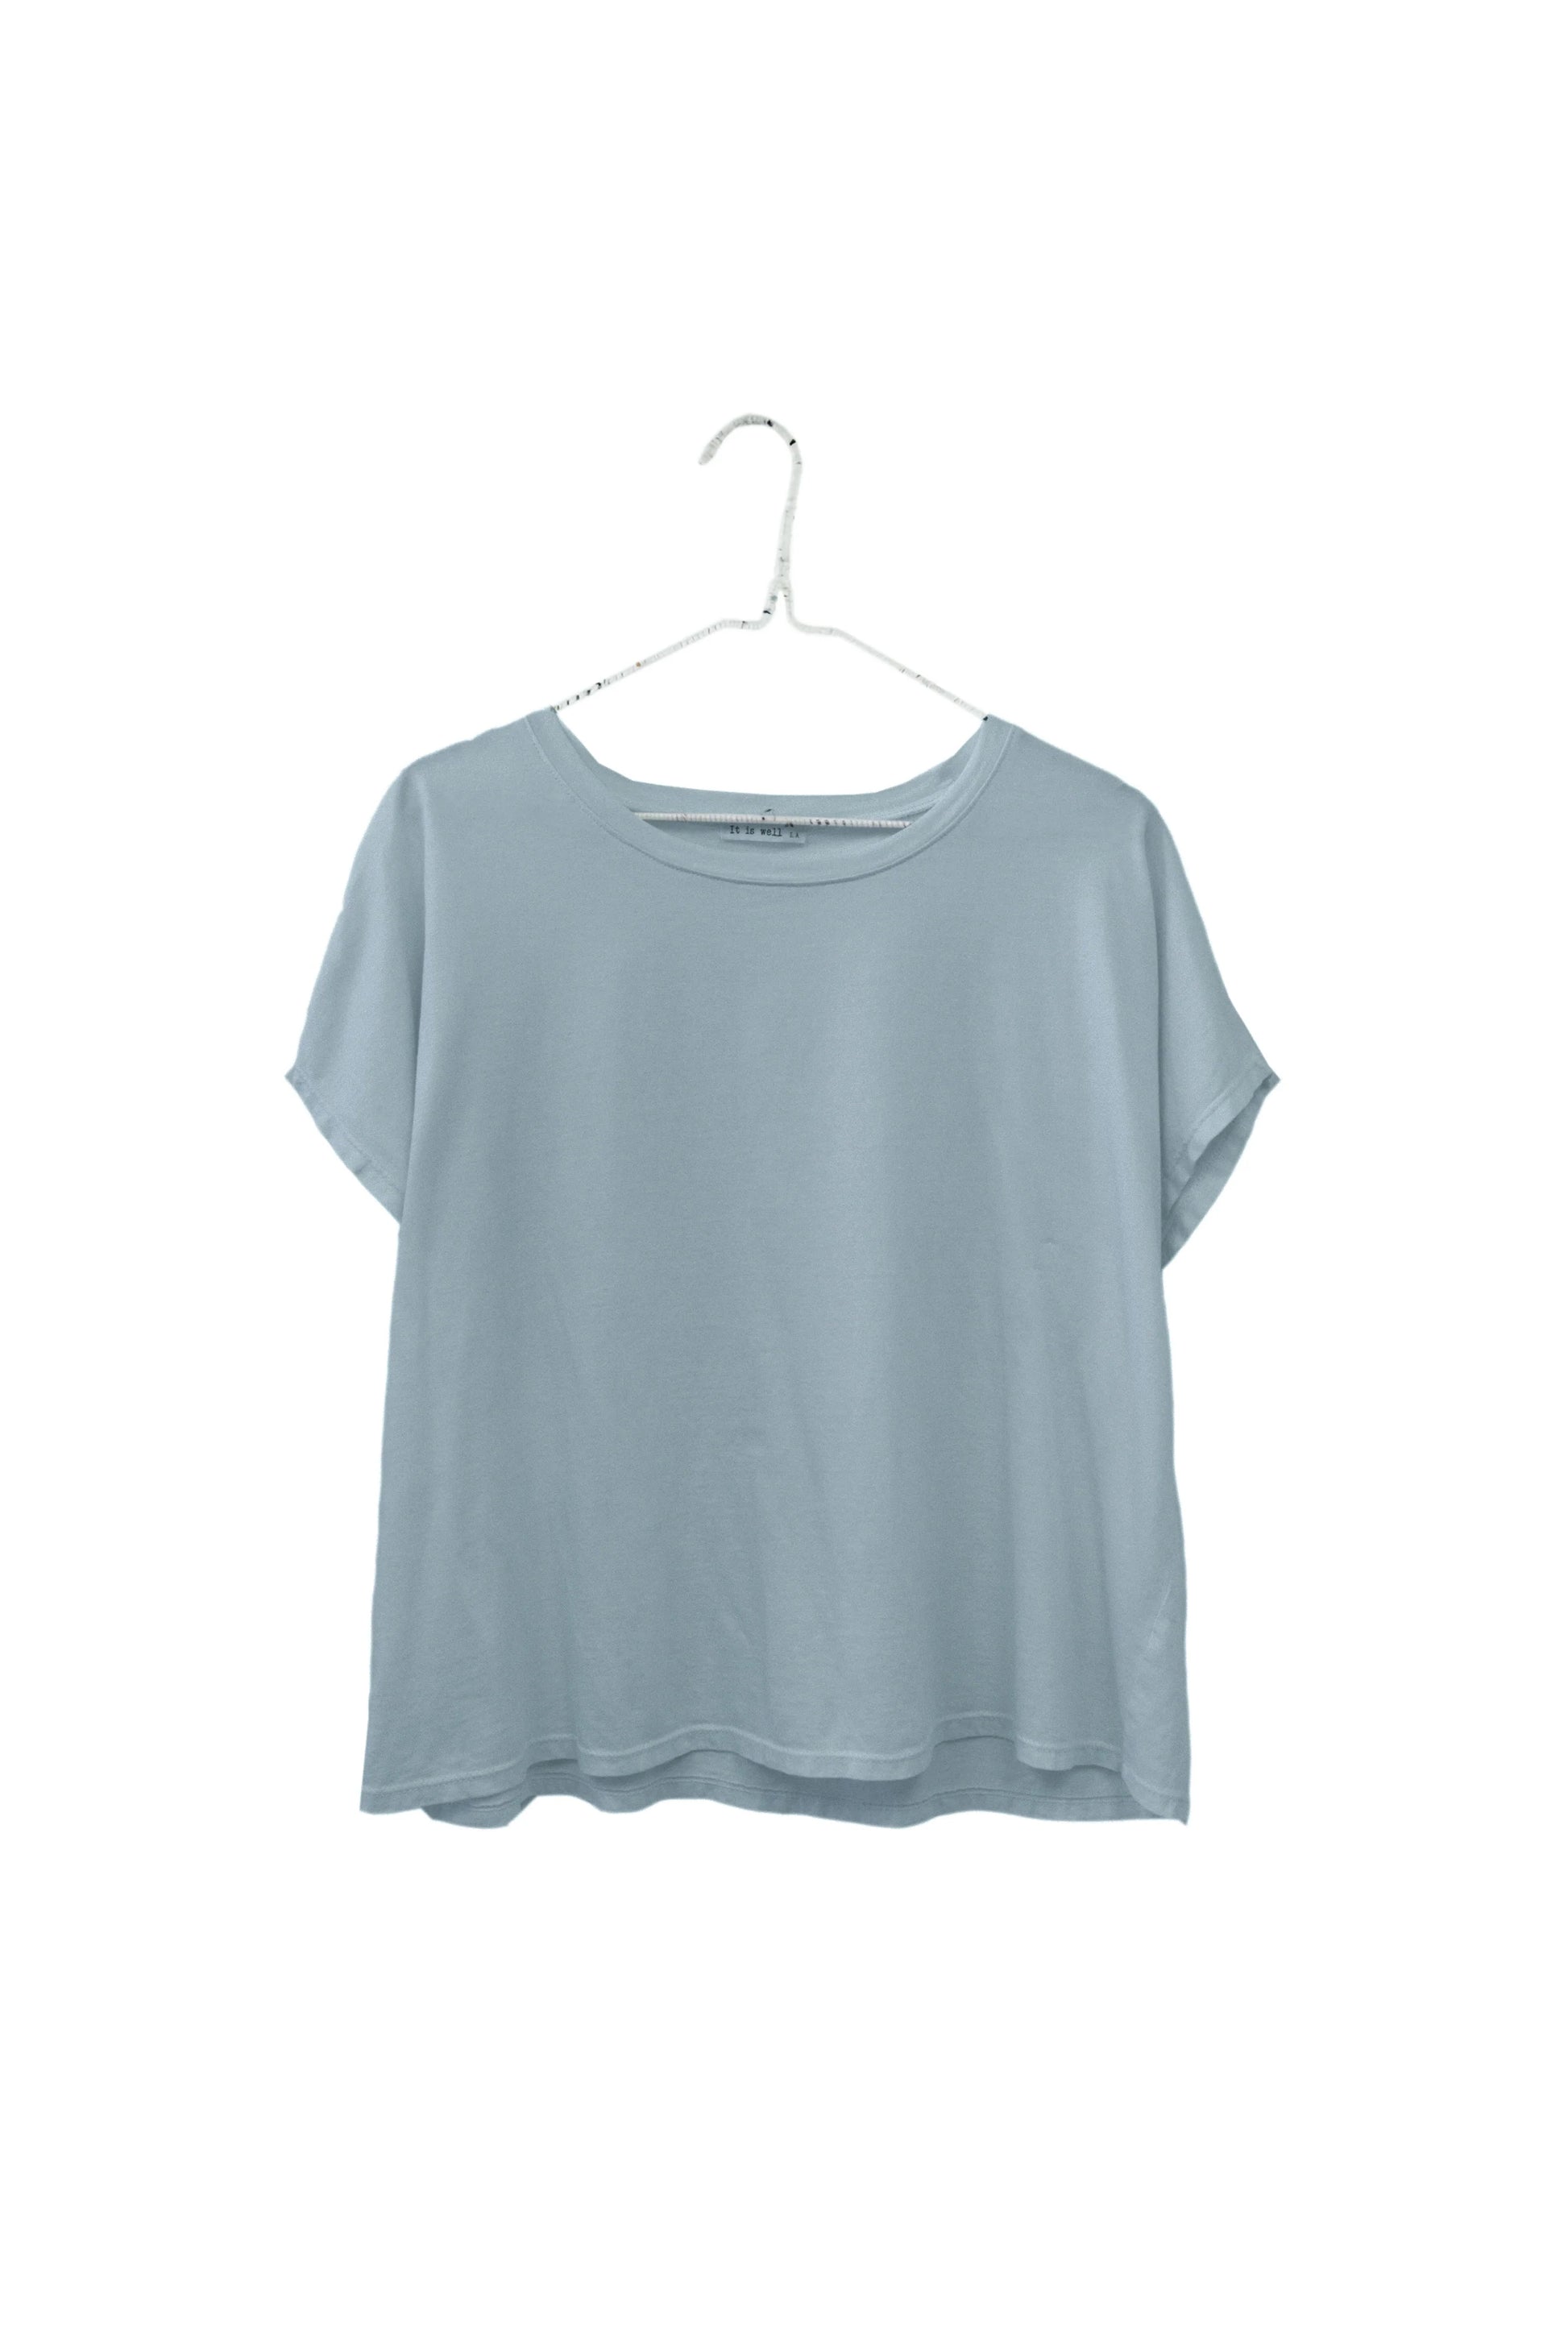 SS24 - It is Well L.A Organic Crewneck Boxy Tee in Misty Sage 